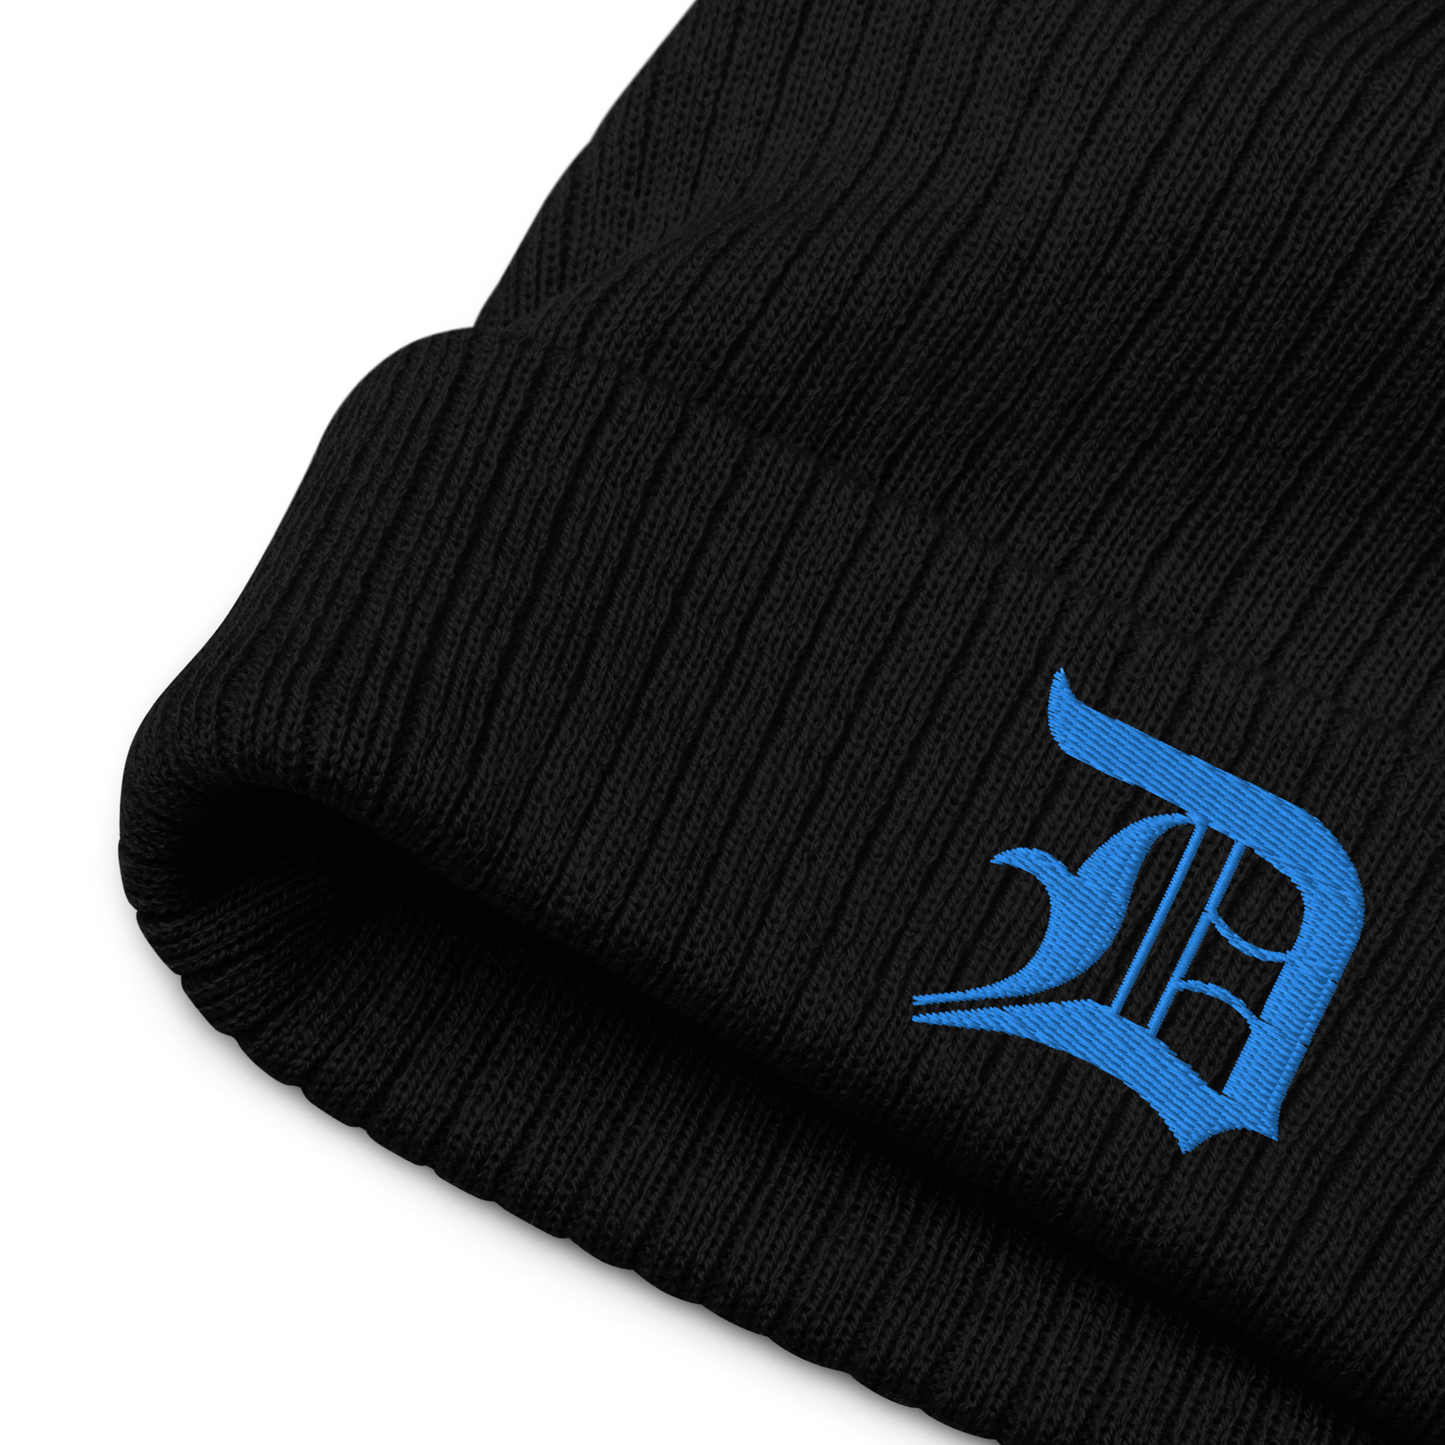 Detroit 'Old English D' Ribbed Beanie (Azure)